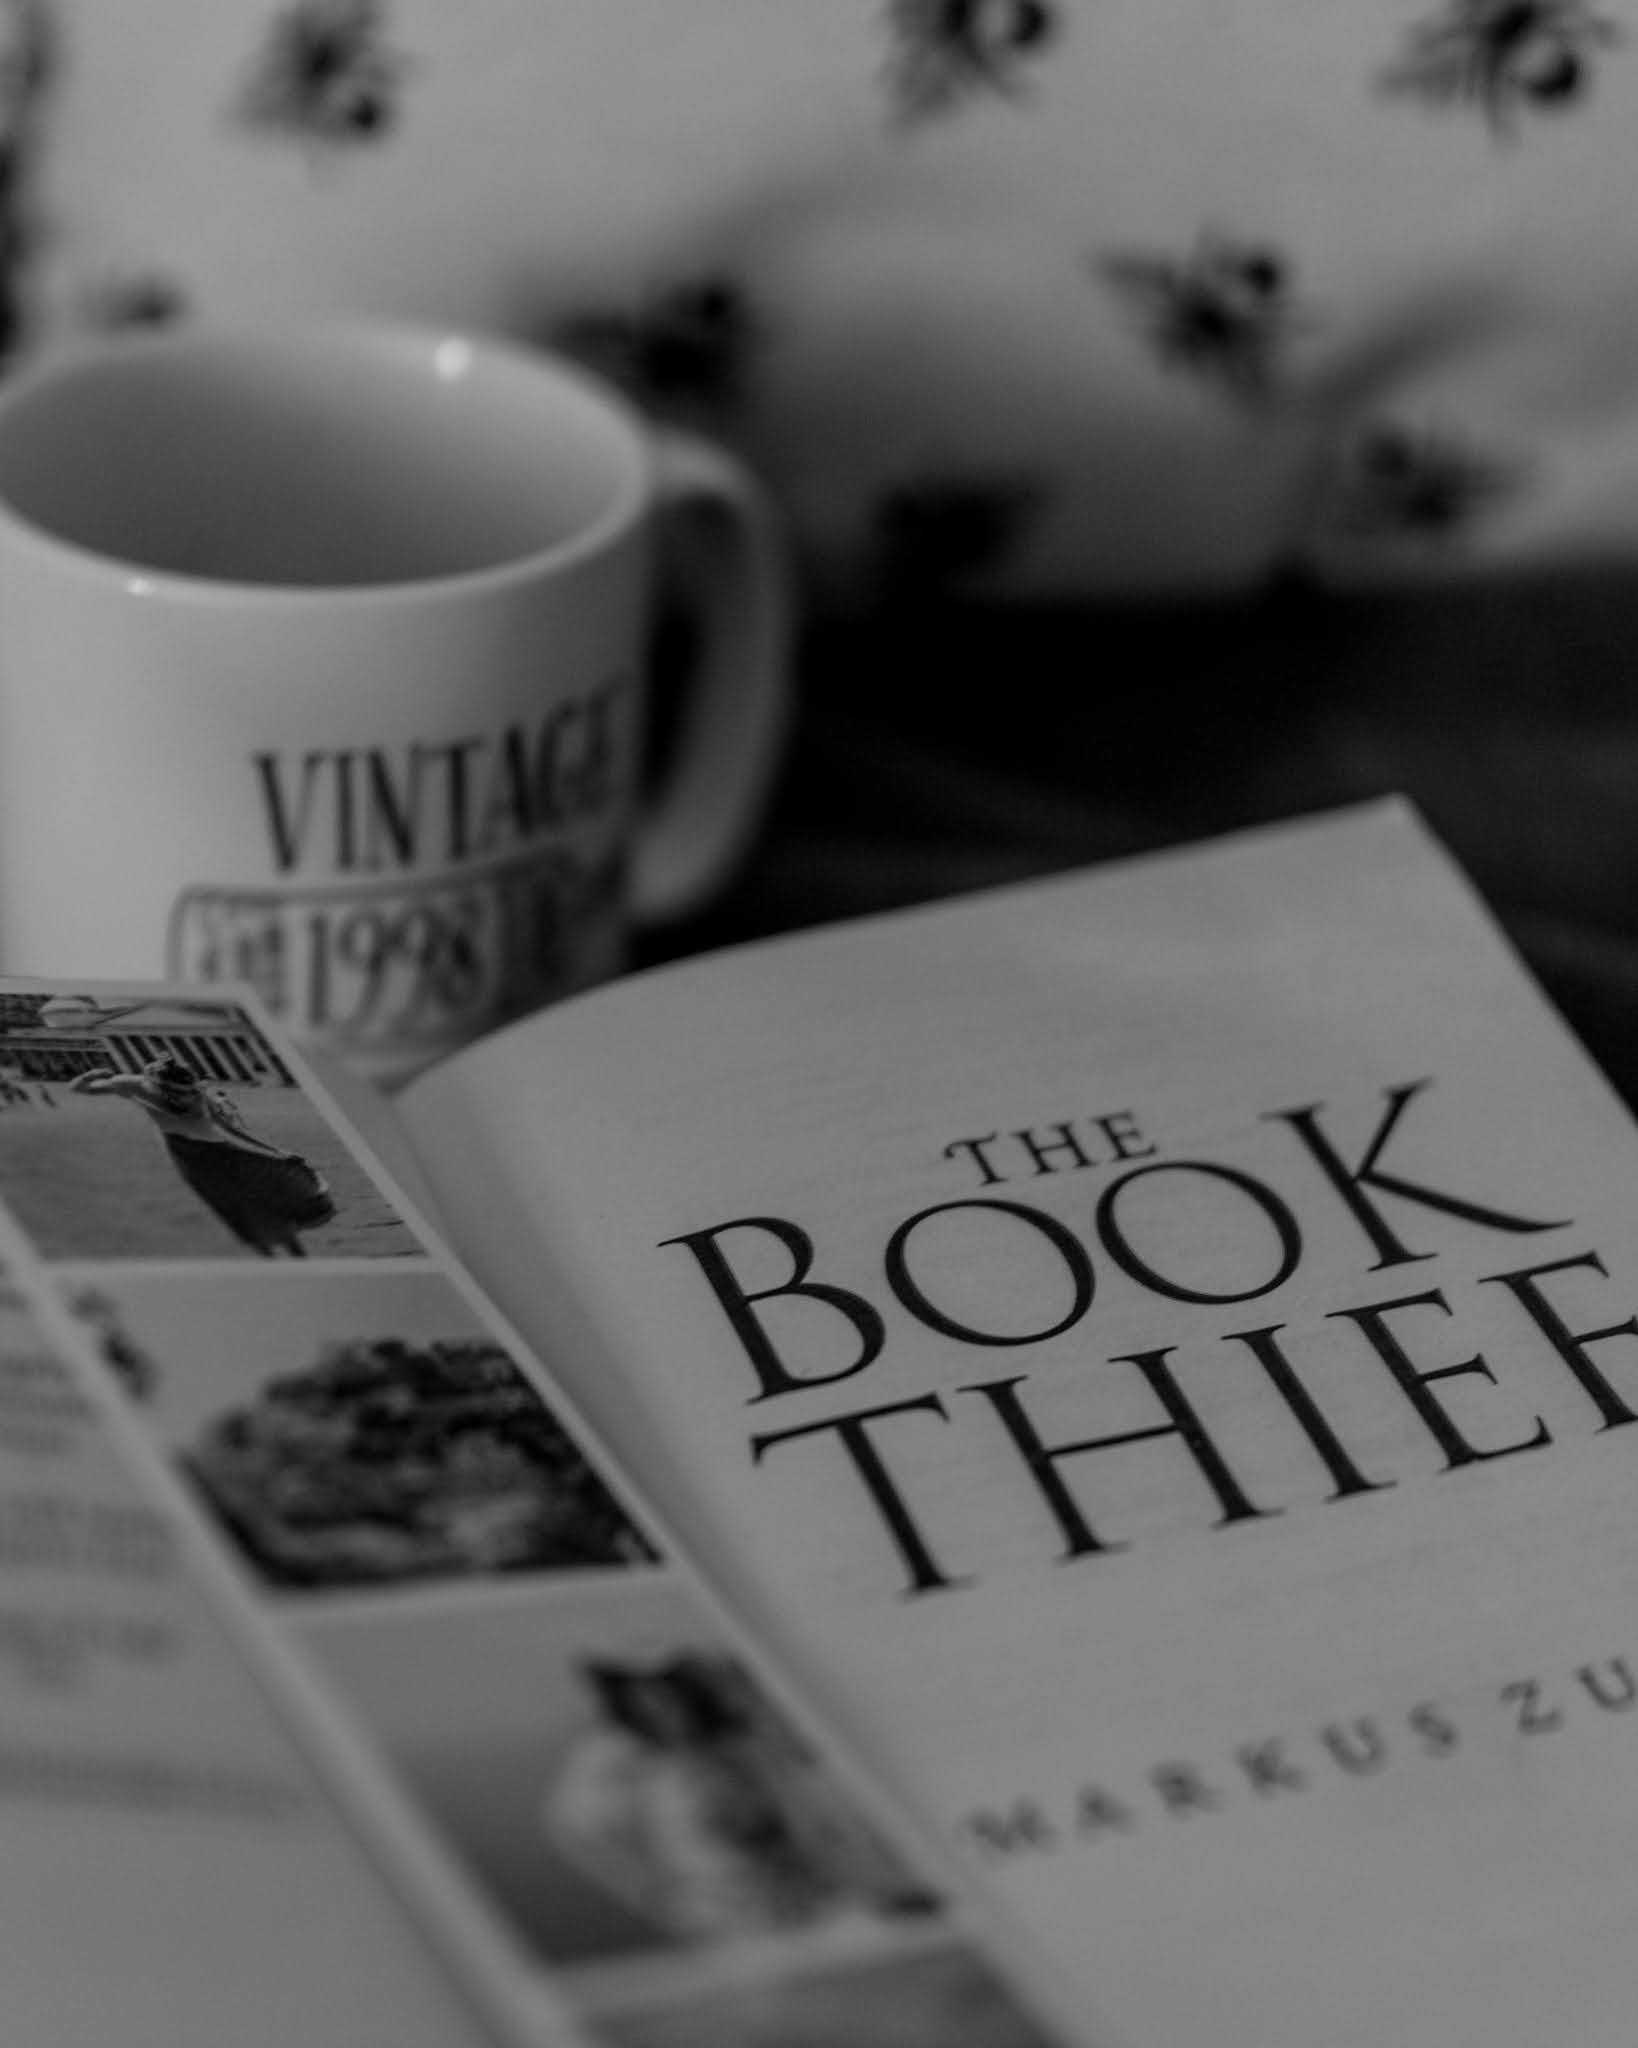 black and white image of open book the book thief by markus zusak with bookmark photostrip and white mug